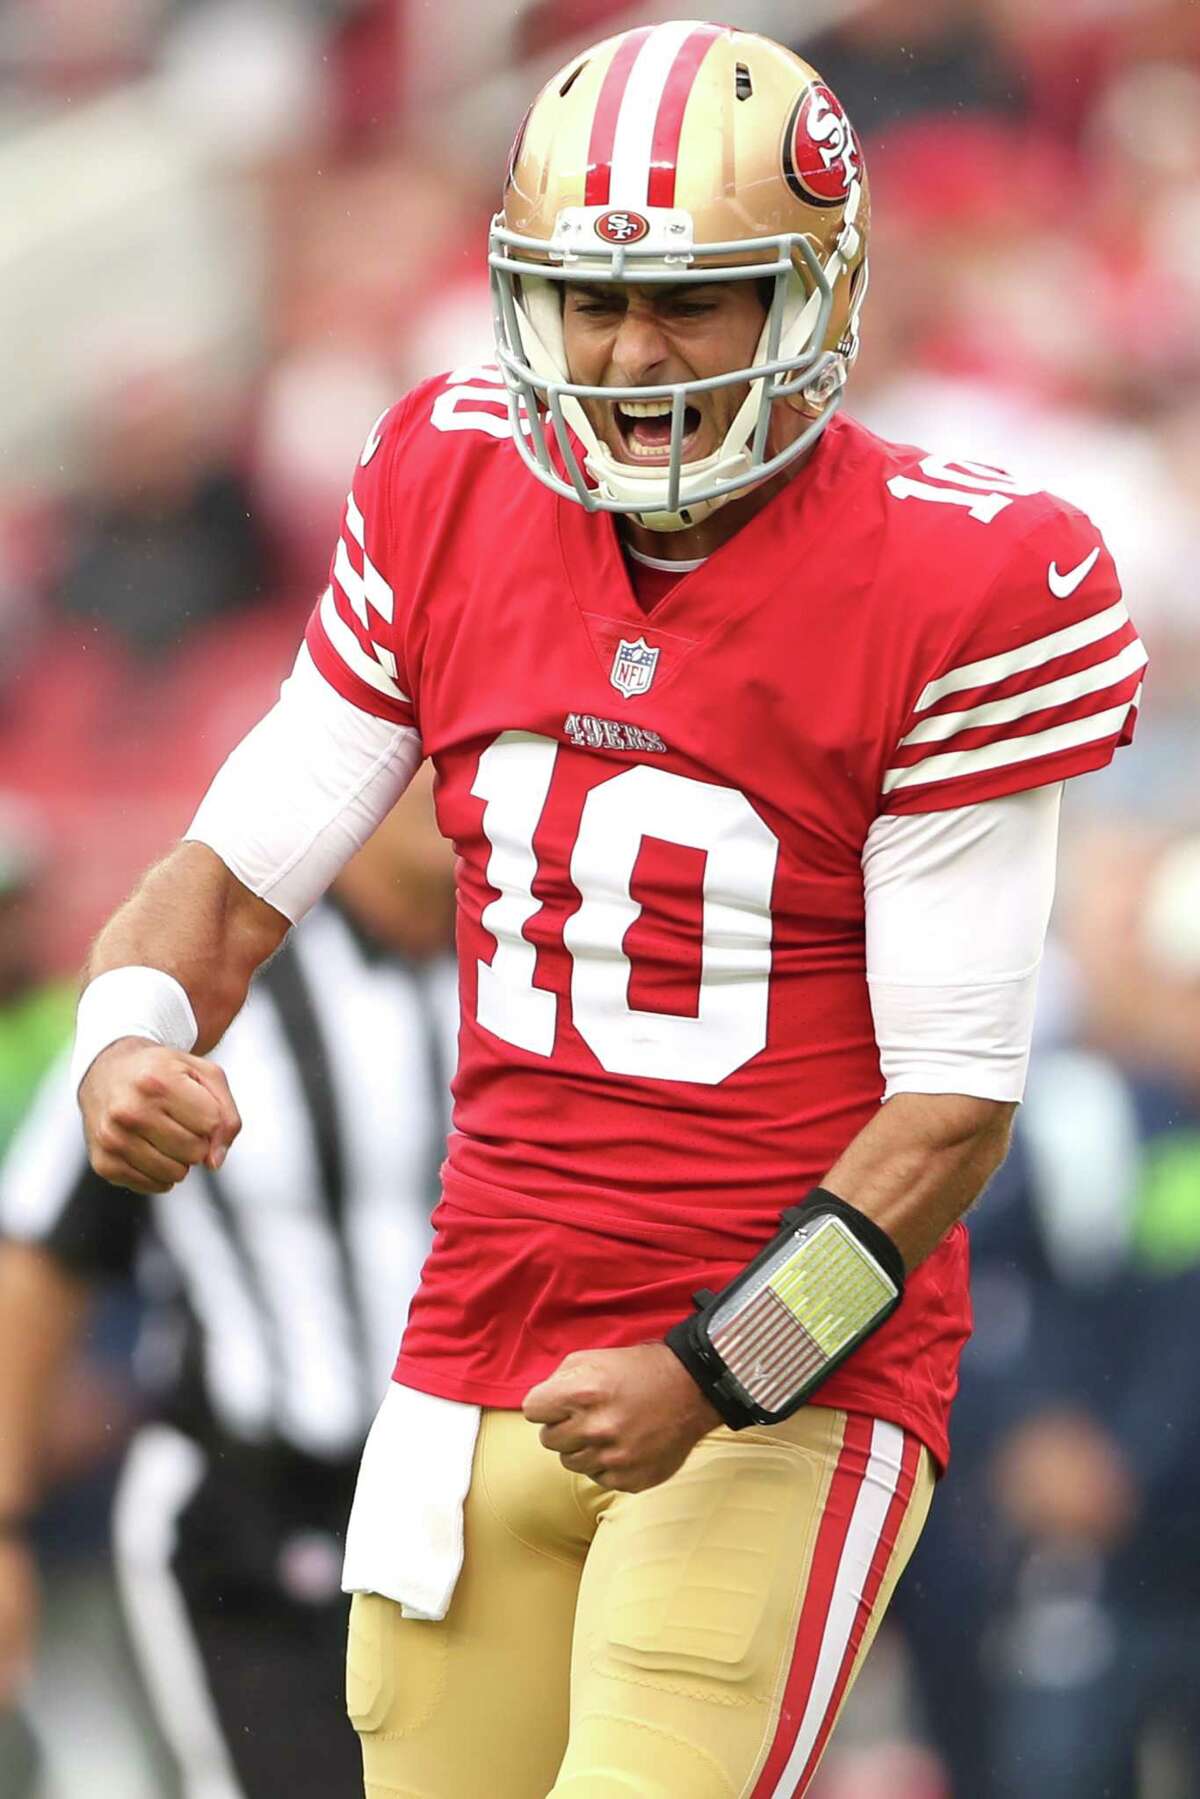 San Francisco 49ers’ Jimmy Garoppolo celebrates touchdown run by Kyle Juszczyk in 2nd quarter against Seattle Seahawks during NFL game at Levi’s Stadium in Santa Clara, Calif., on Sunday, September 18, 2022.